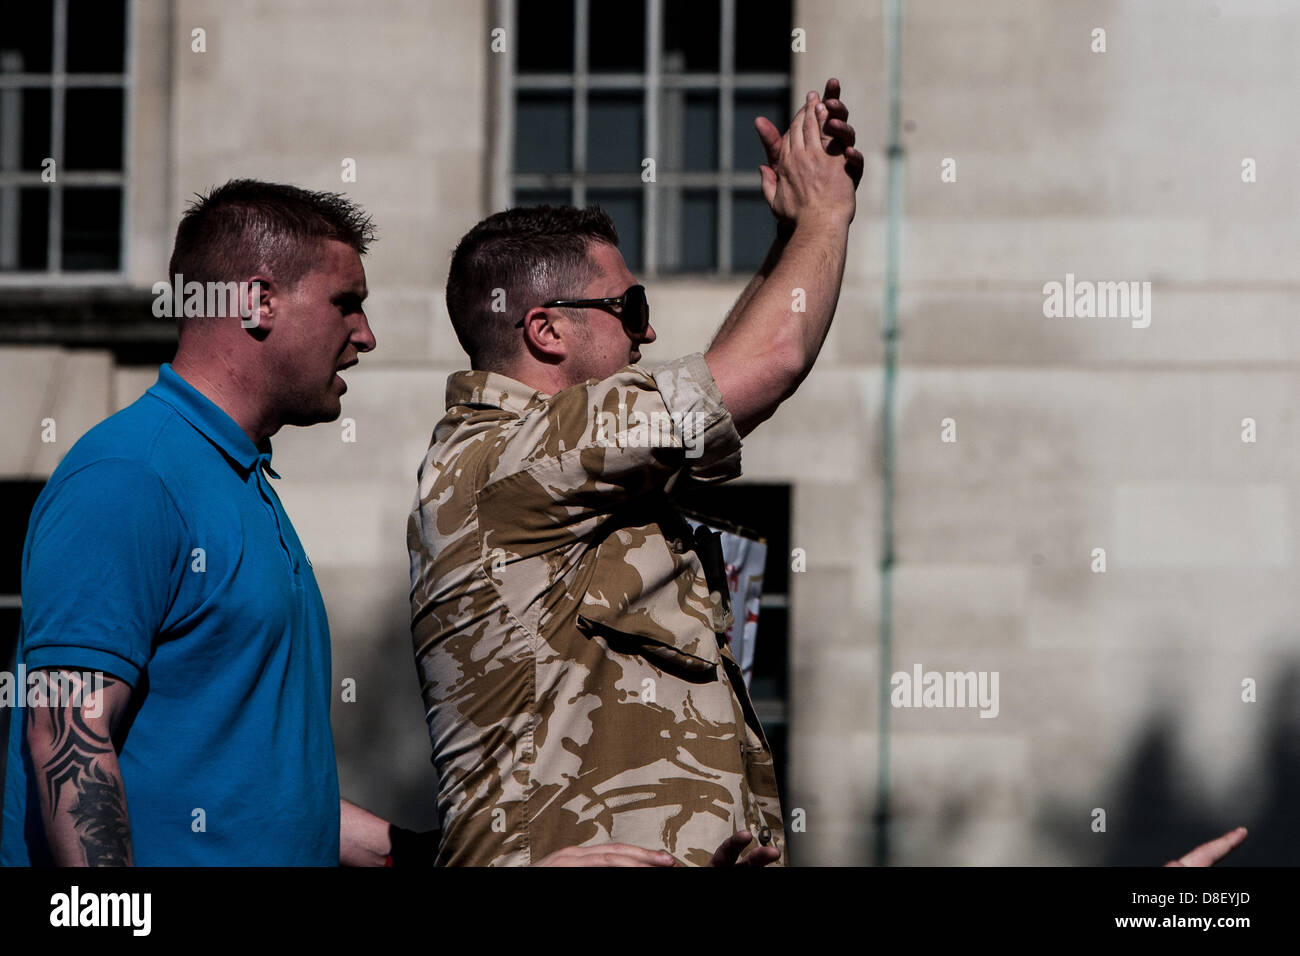 London, United Kingdom. 27th May 2013.  Stephen Yaxley-Lennon, A.K.A Tommy Robinson, leader of  The right-wing pressure group, The English Defence League, at the  protest outside Downing Street in response to the Woolwich Murder of Lee Rigsby  Credit:  Mario Mitsis / Alamy Live News Stock Photo